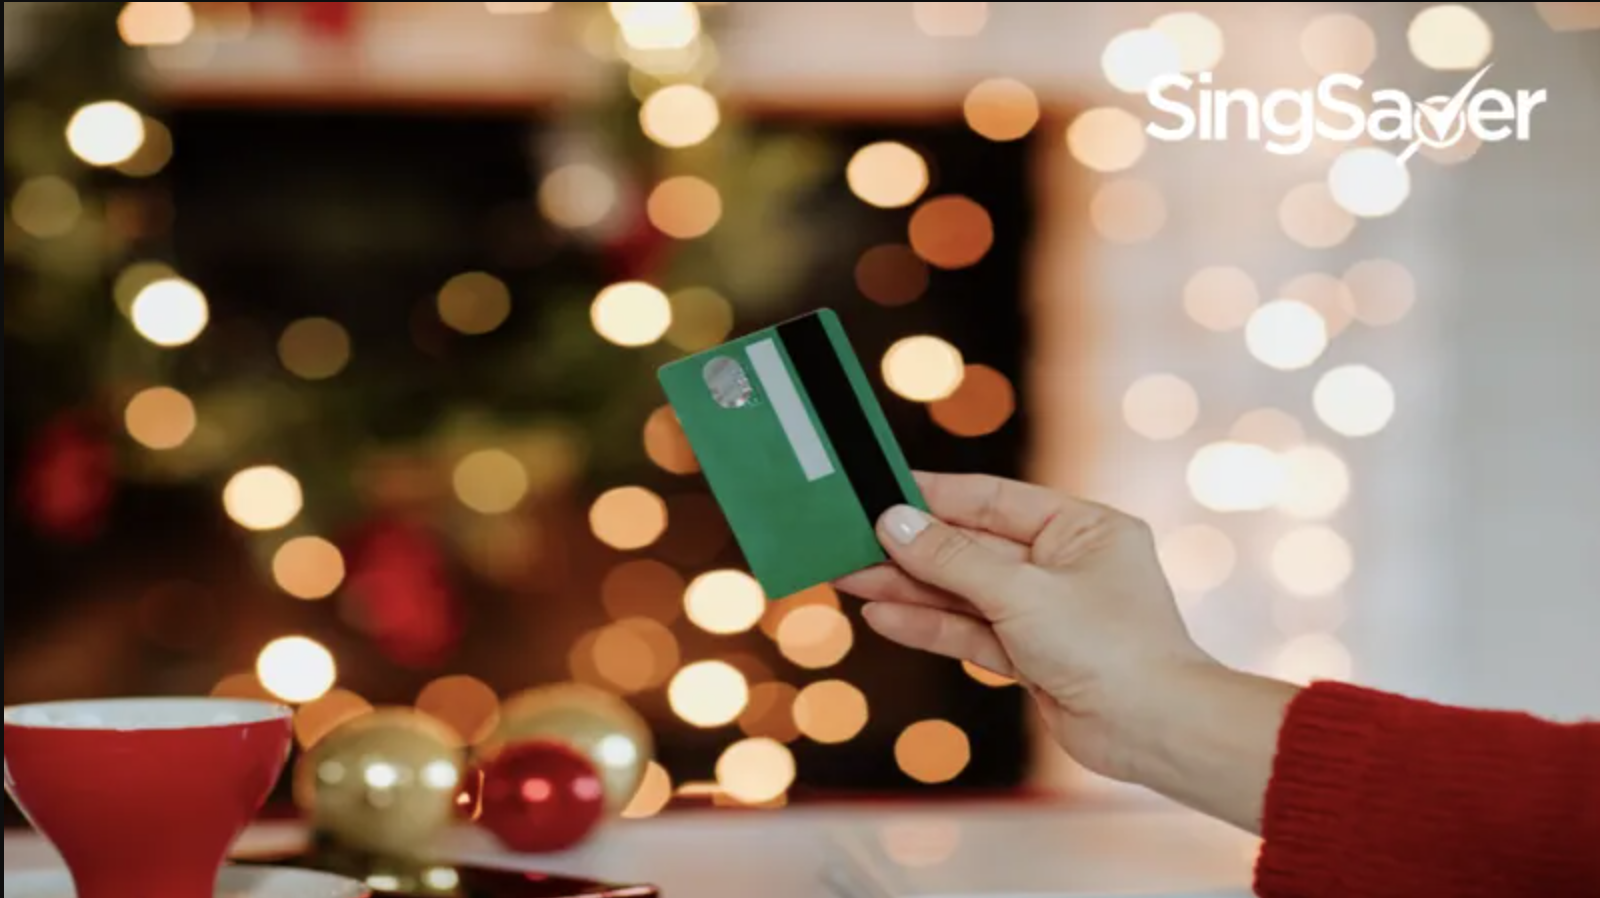 How To Maximise Your Rewards And Discounts On Christmas And Year-End Shopping